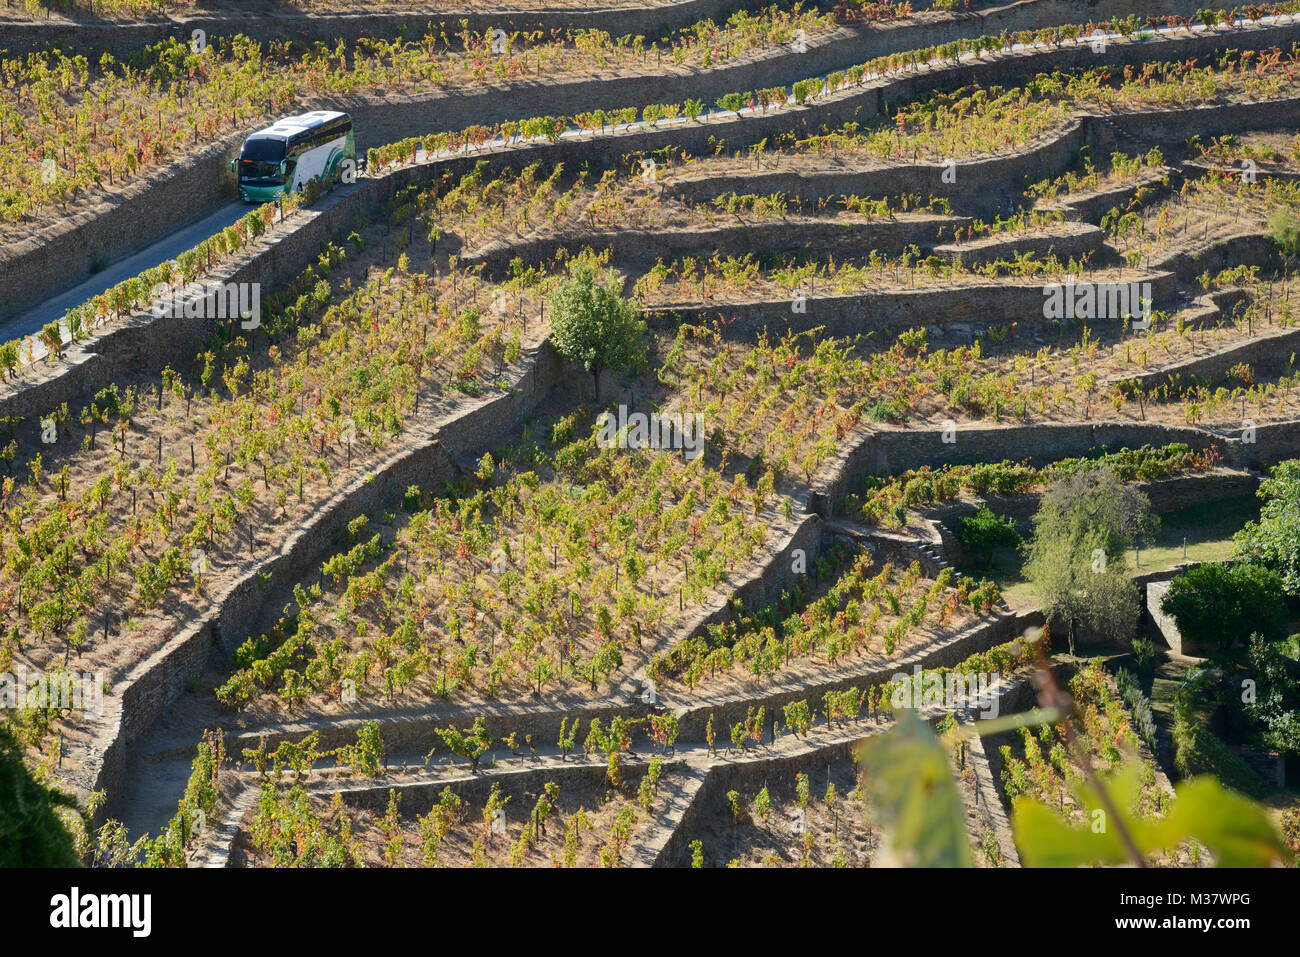 Vineyards on man-made terraces on the hills of the Douro Valley, Portugal, Europe Stock Photo